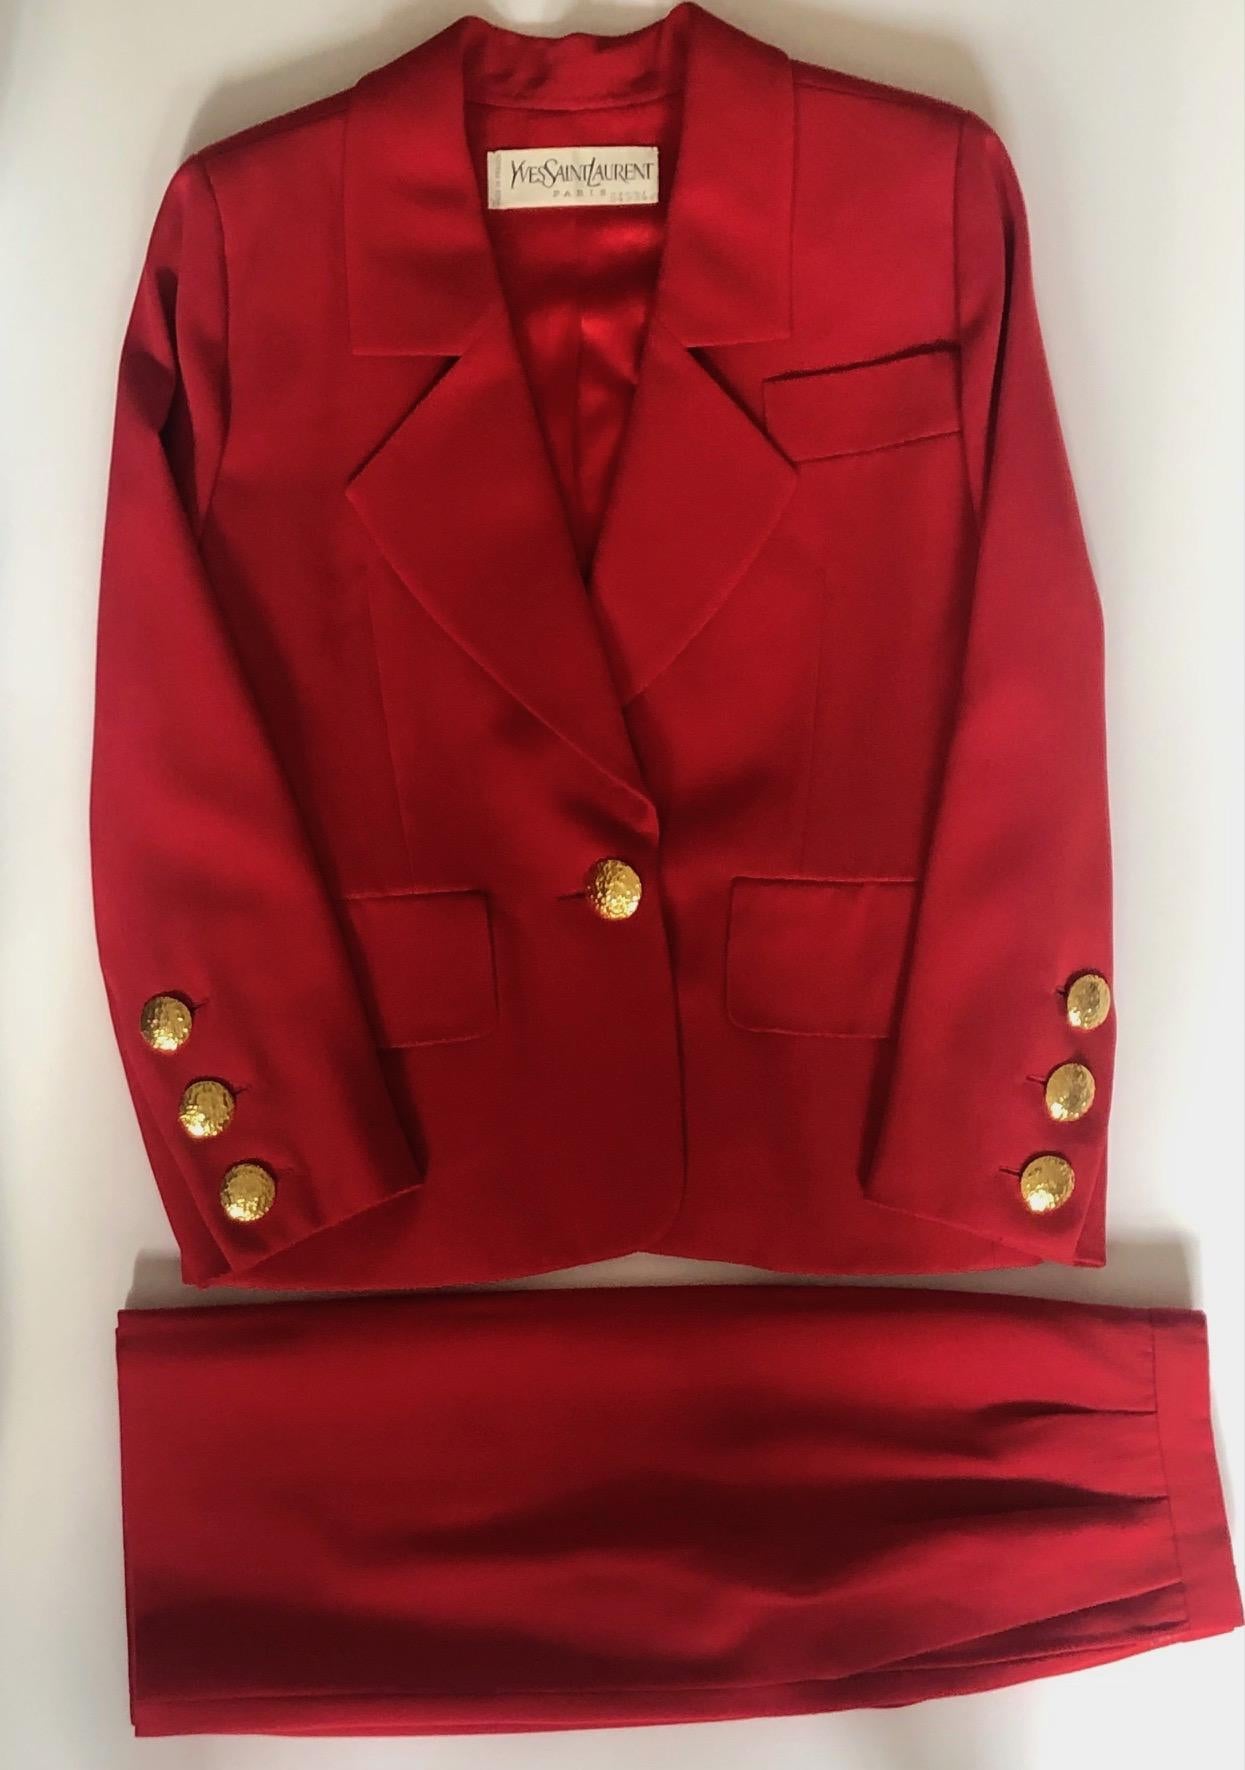 YVES SAINT-LAURENT Haute Couture 64534 Red Single Breasted Jacket Suit Vintage
Yves Saint-Laurent Haute Couture no.64534 Circa 1988-1990. A classic chic, red woolen jacket-blazer suit. A padded jacket with notched shawl collar, single-breasted with